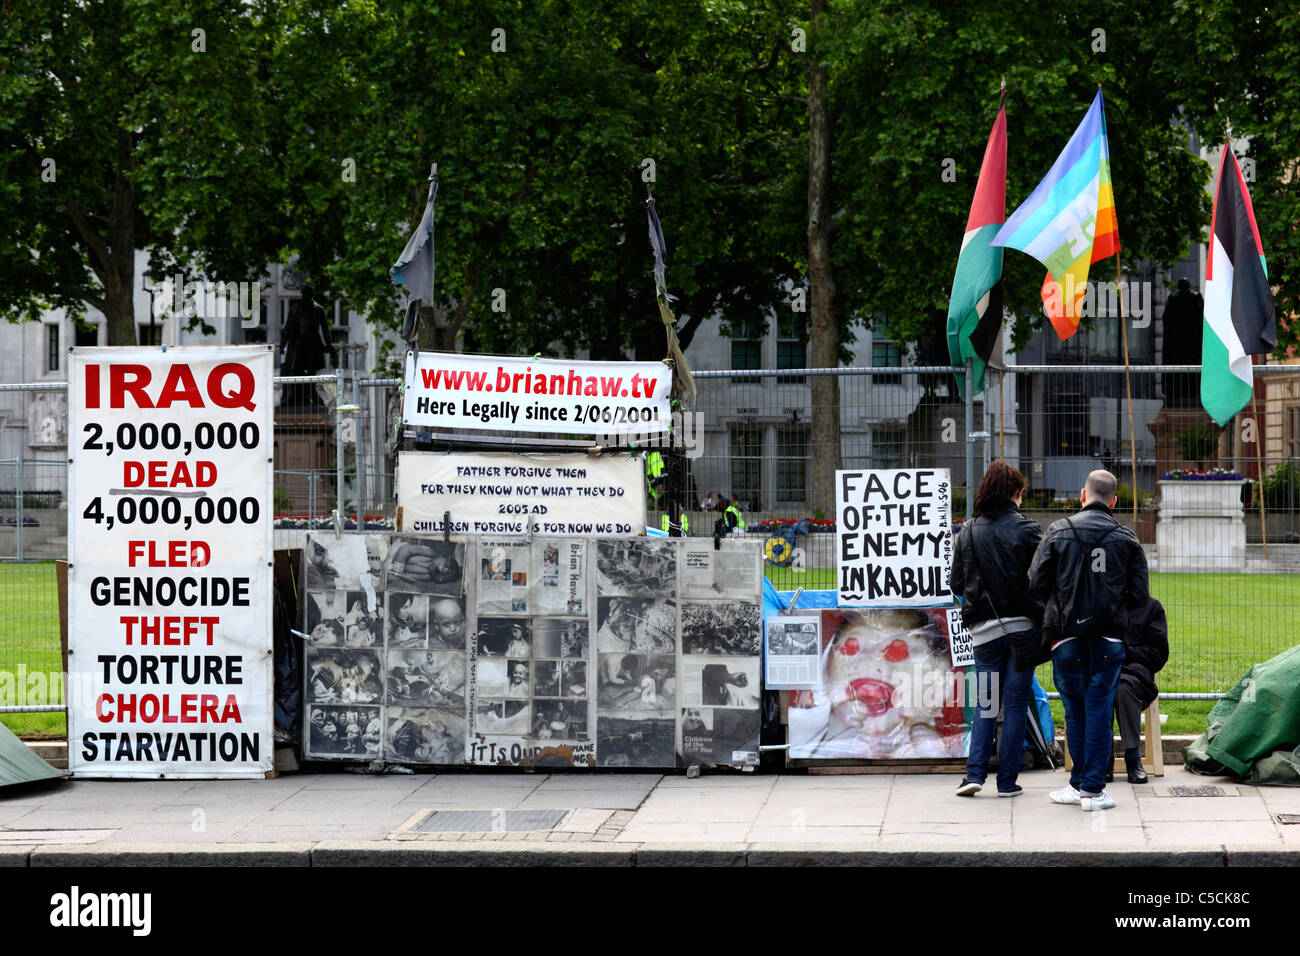 View of the Parliament Square Peace Campaign / Brian Haw peace camp, Parliament Square, Westminster, London, UK Stock Photo